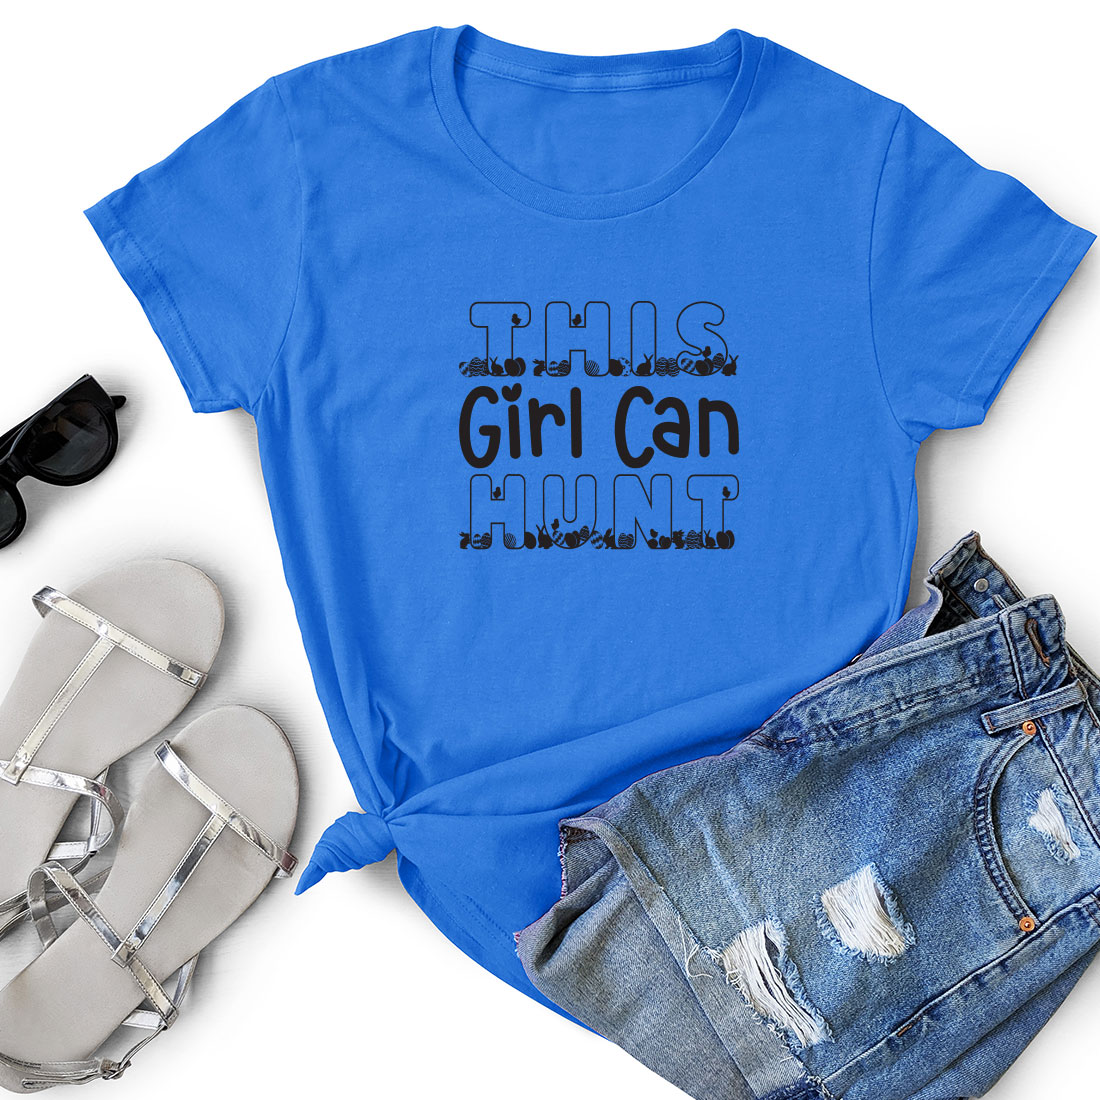 T - shirt that says girl can marry next to a pair of shorts and.